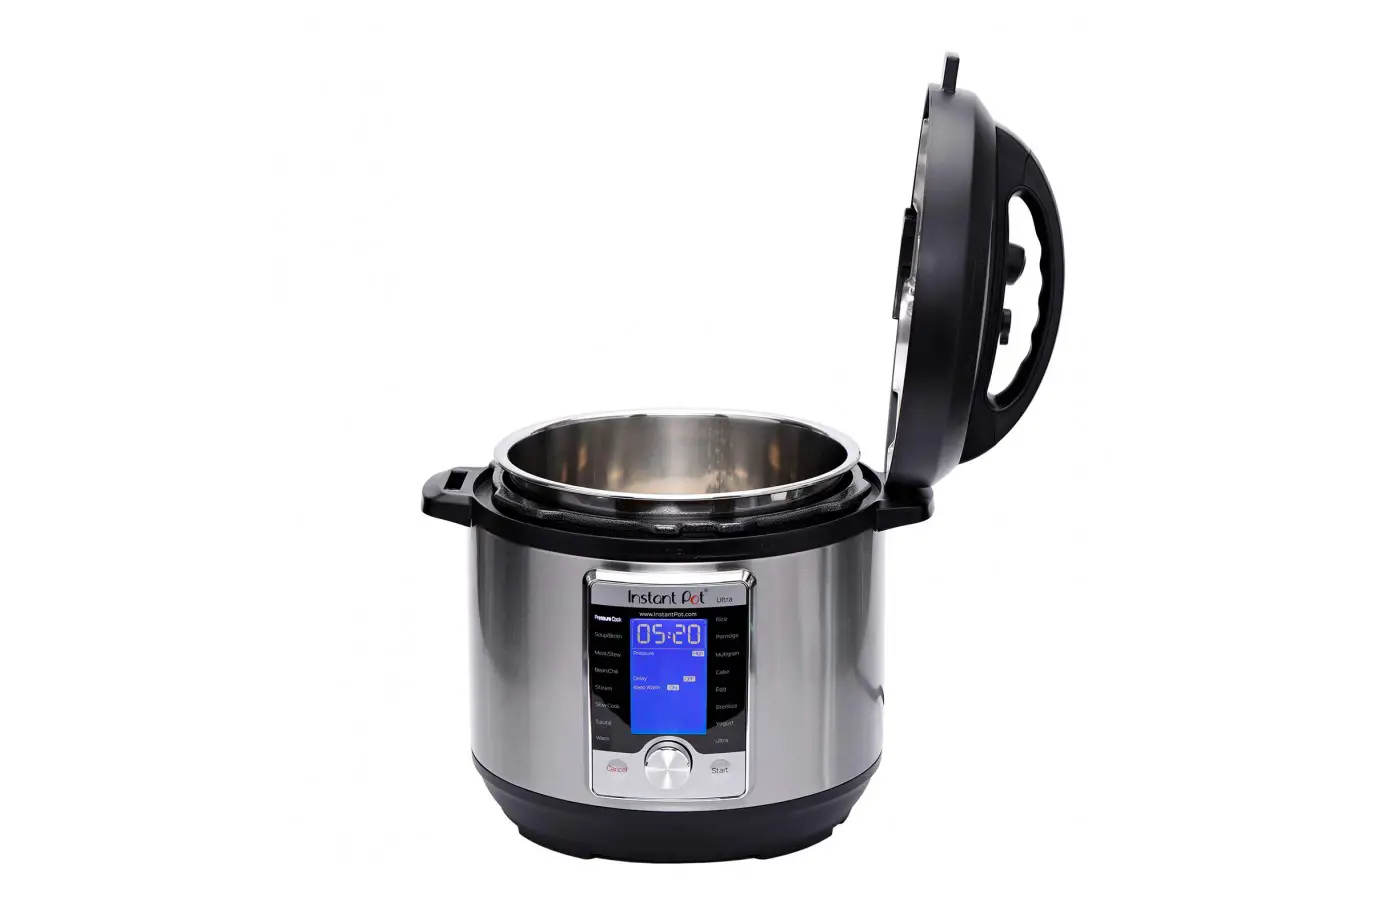 The Instant Pot Duo offers a strong pressurized seal for safer and more reliable cooking.